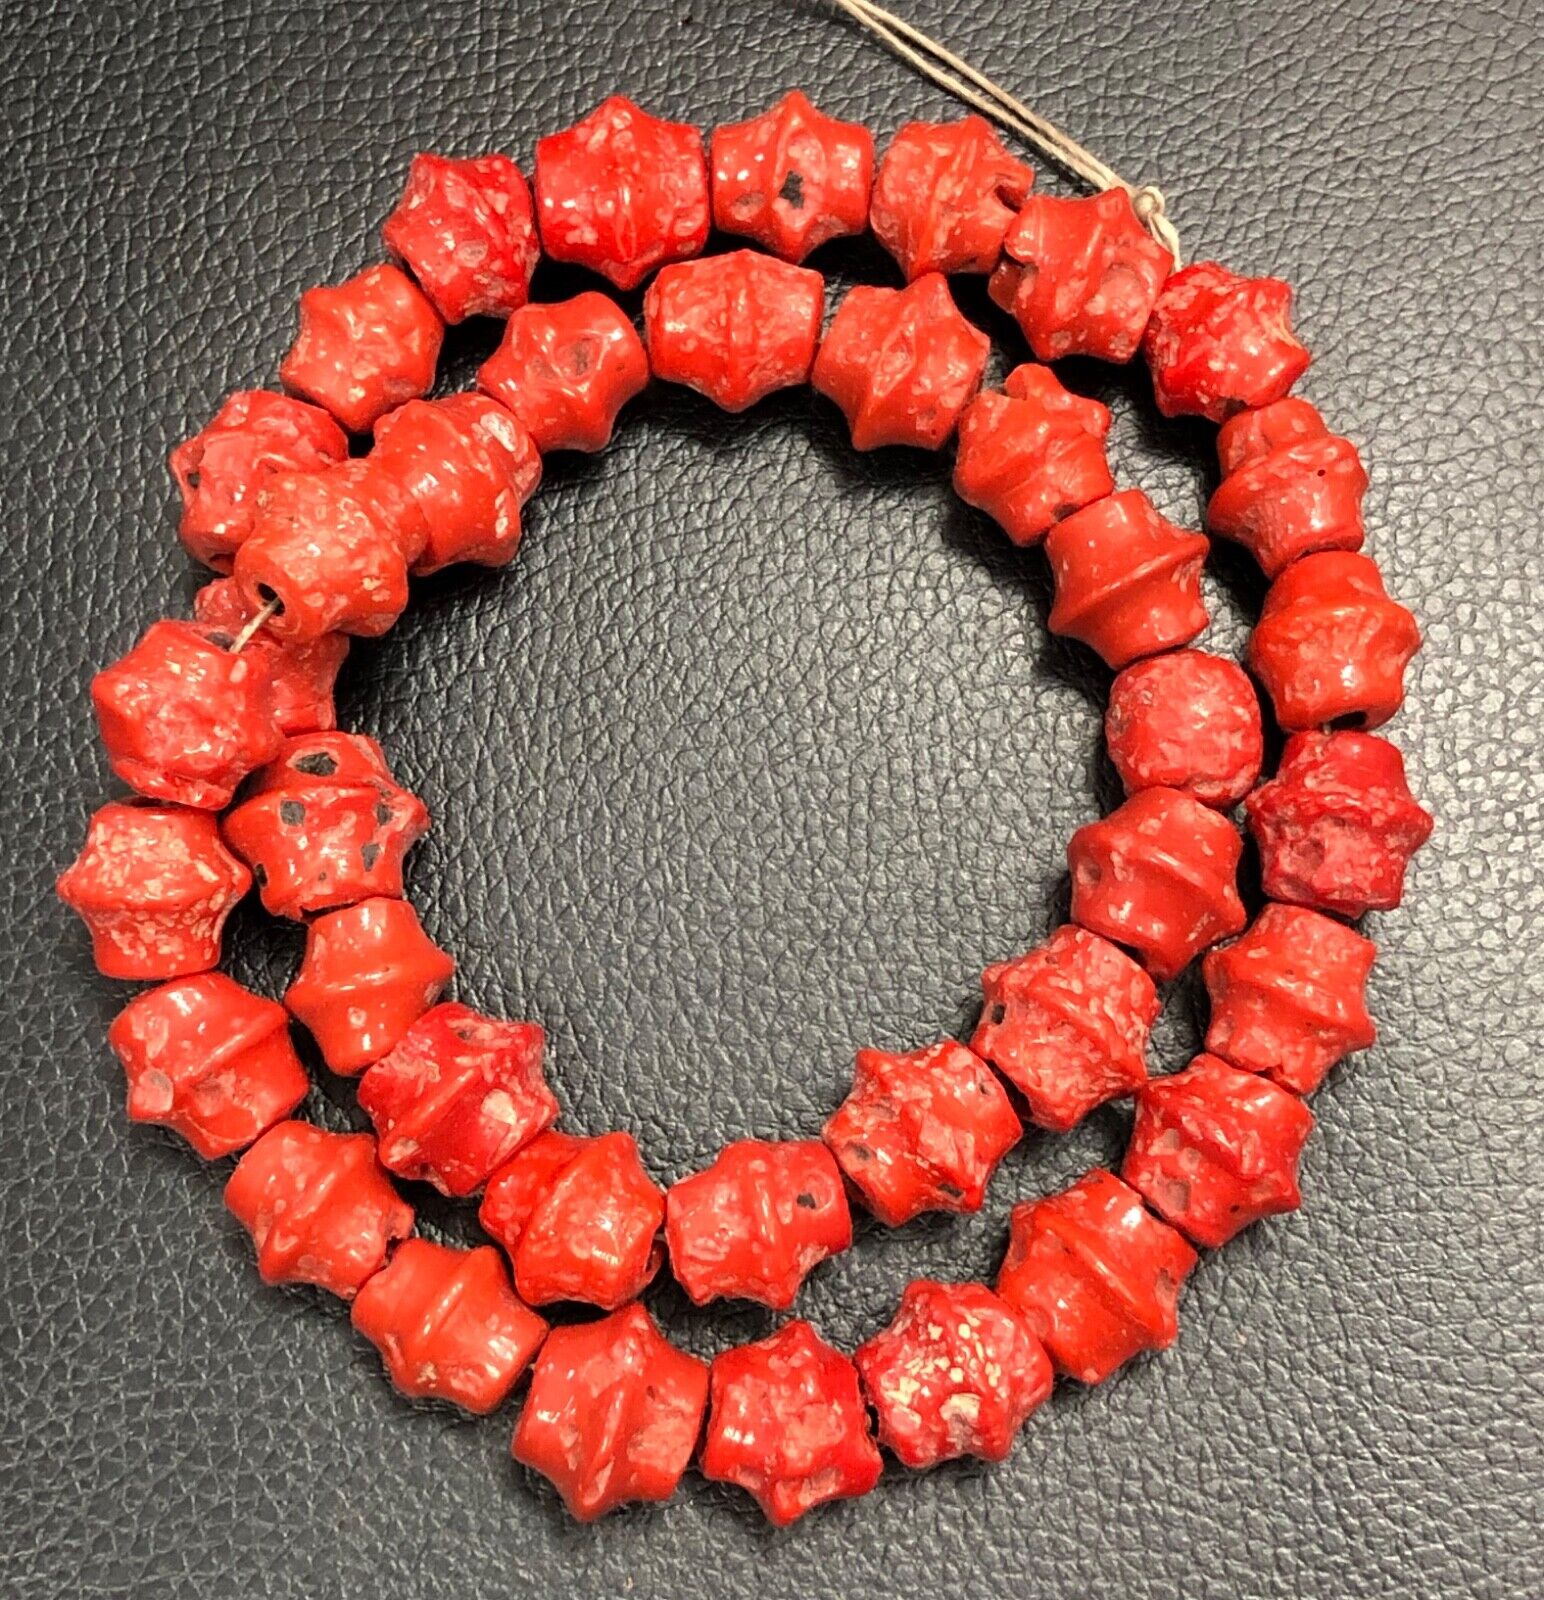 Antique Venetian Look Like Coral Chevron Bead Strand Old African Trade Beads